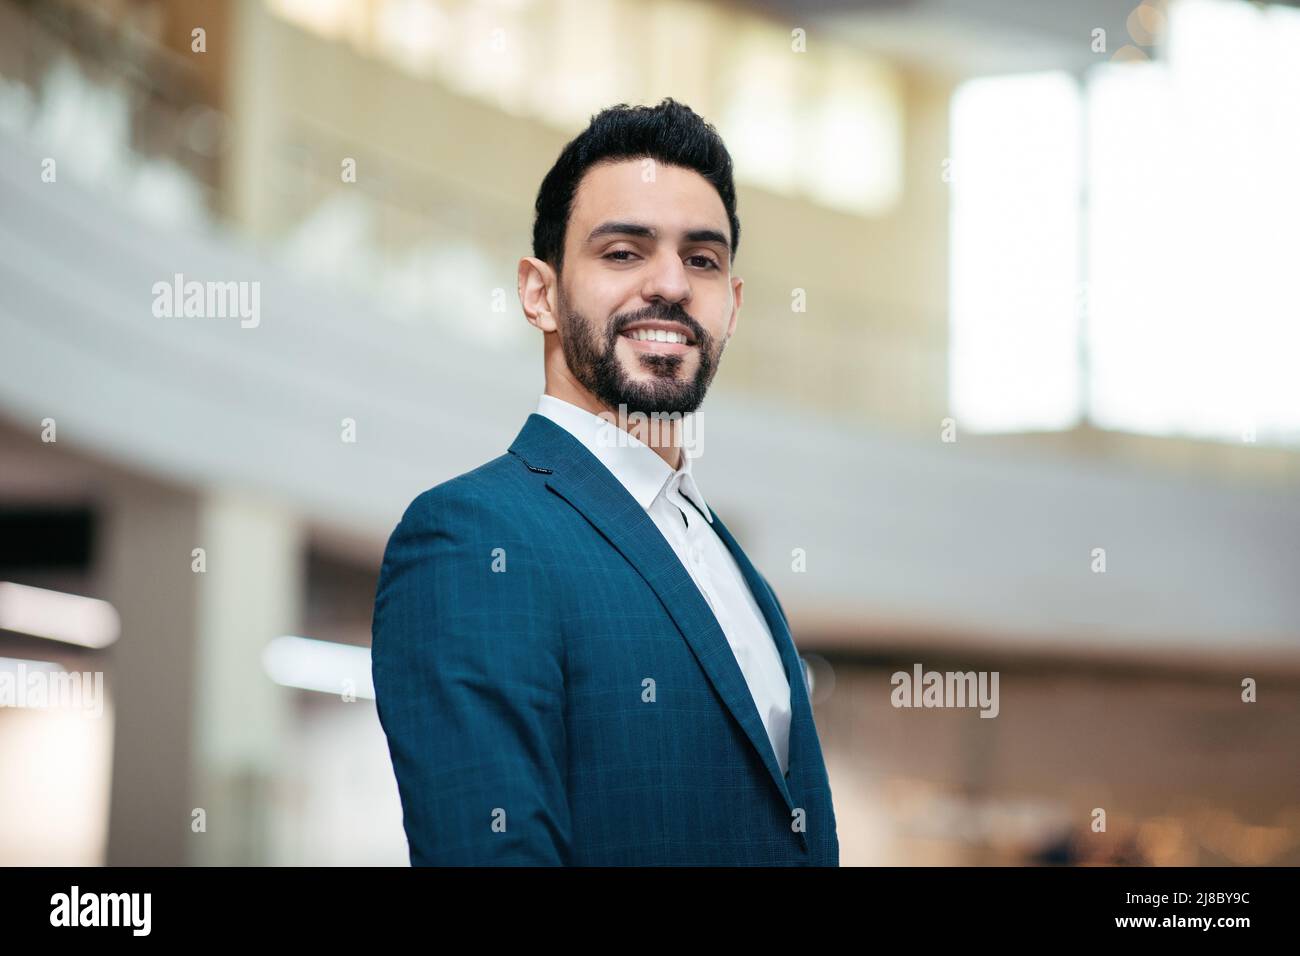 Smiling confident attractive young arab guy, general manager with beard in suit looks at camera Stock Photo